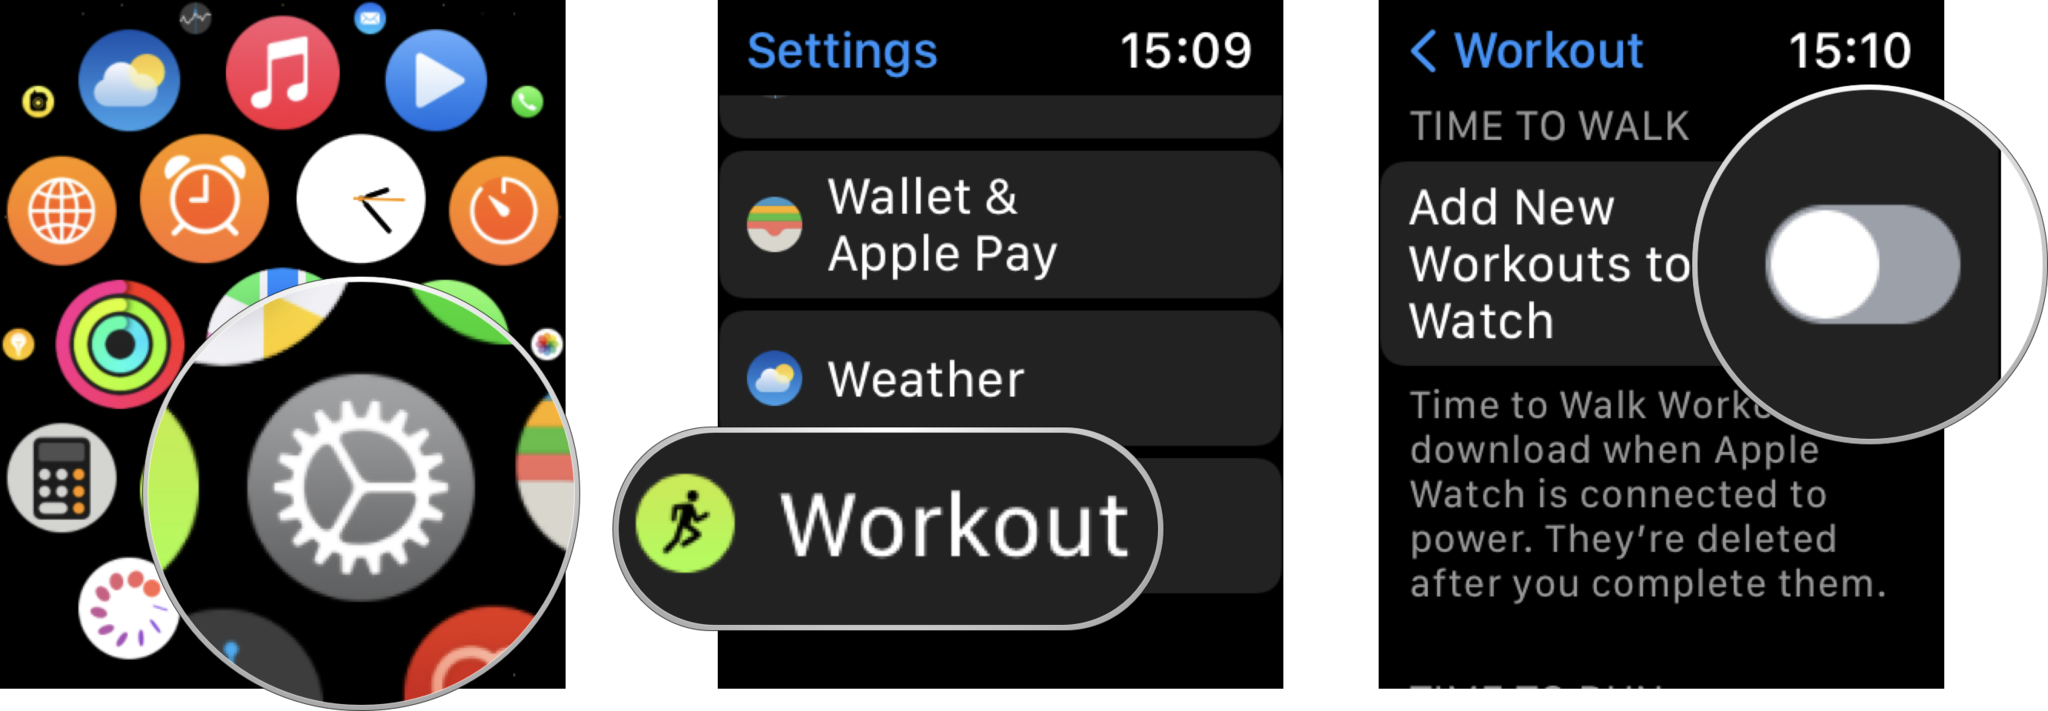 Stop automatic Time to Walk and Time to Run episode downloads on Apple Watch: Open Settings, tap Workout, under Time to Walk and Time to Run turn the toggles beside Add New Workouts to Watch to the off position.